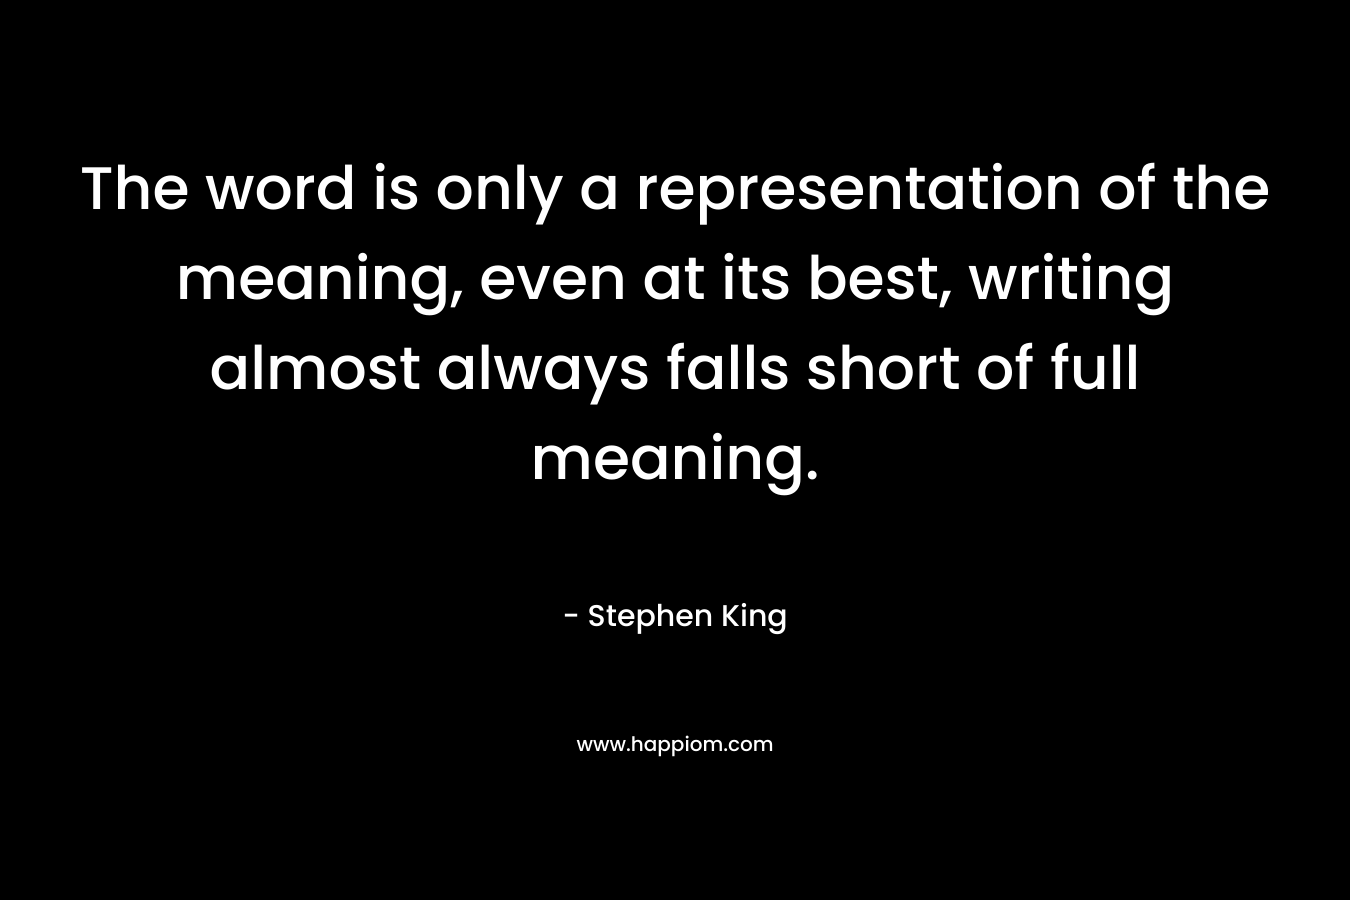 The word is only a representation of the meaning, even at its best, writing almost always falls short of full meaning.